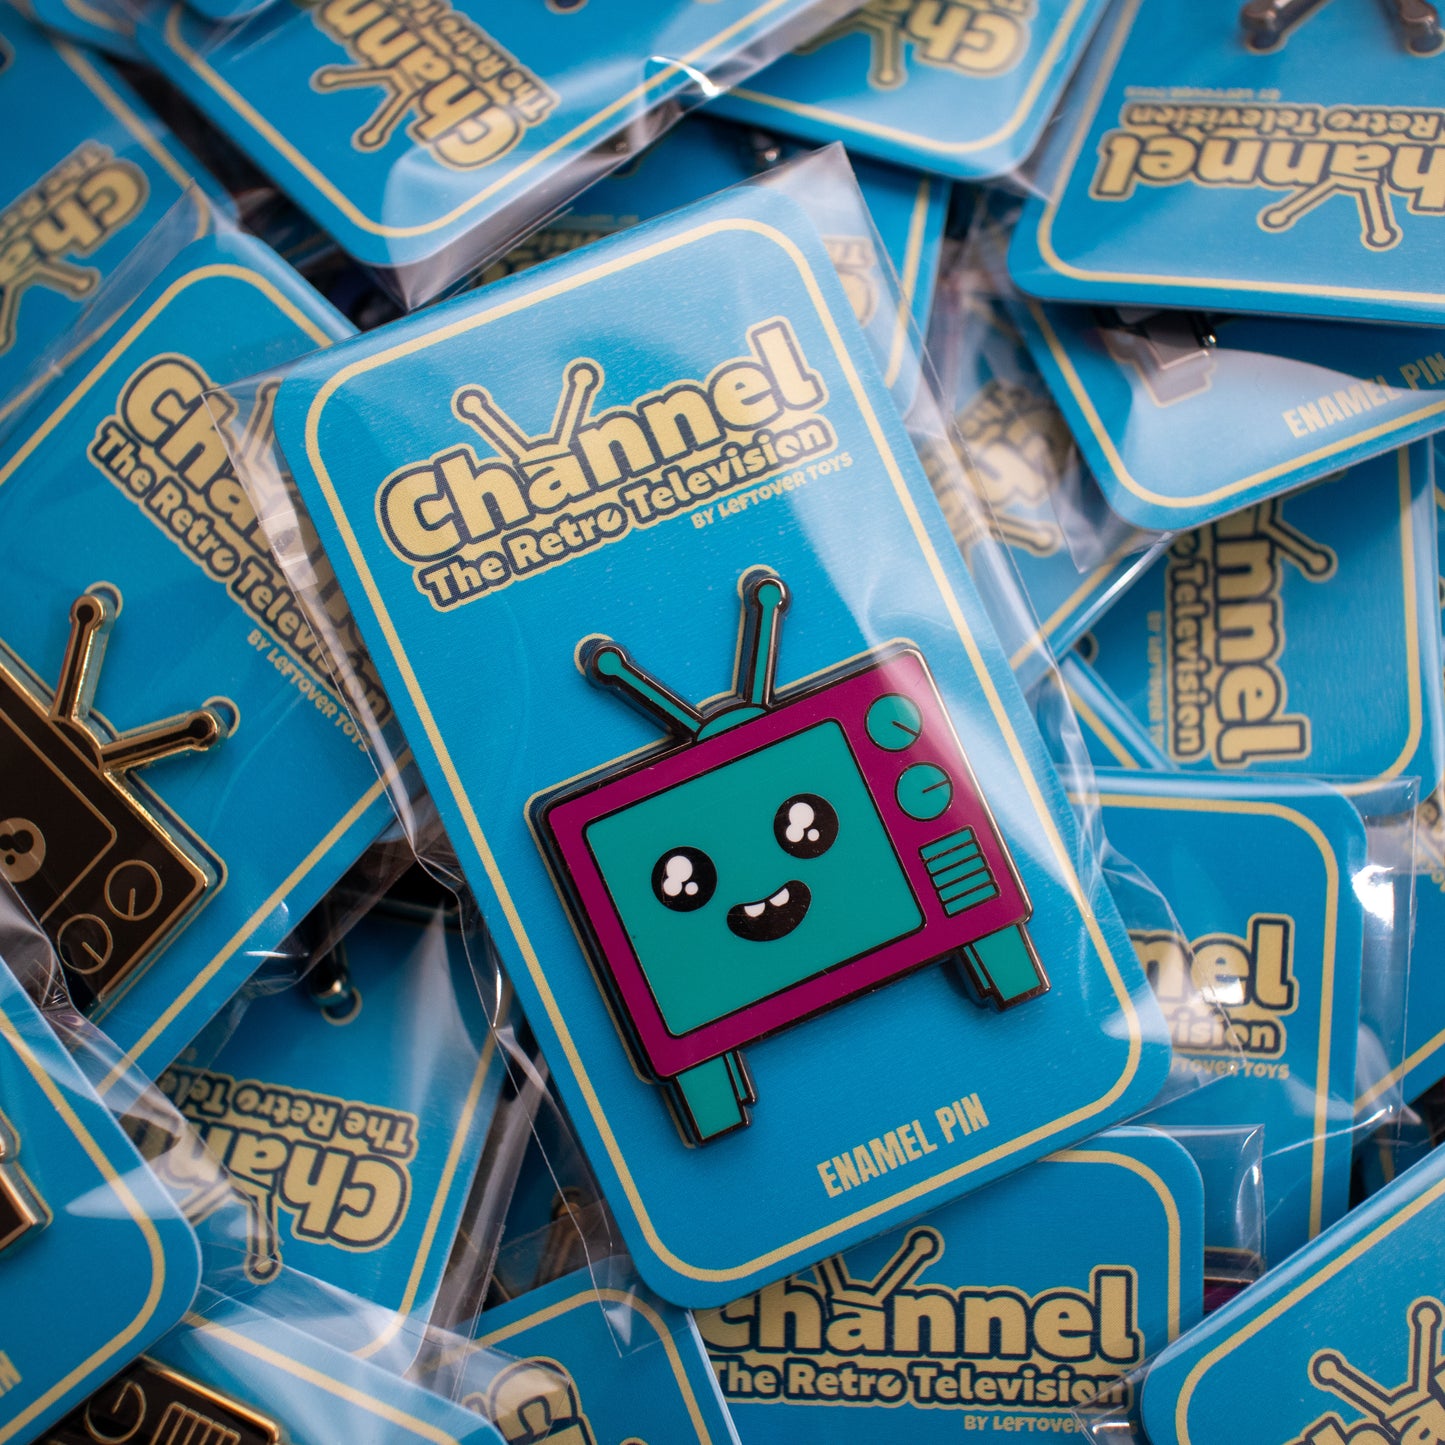 Founders Edition Channel the Retro Television Enamel Pin